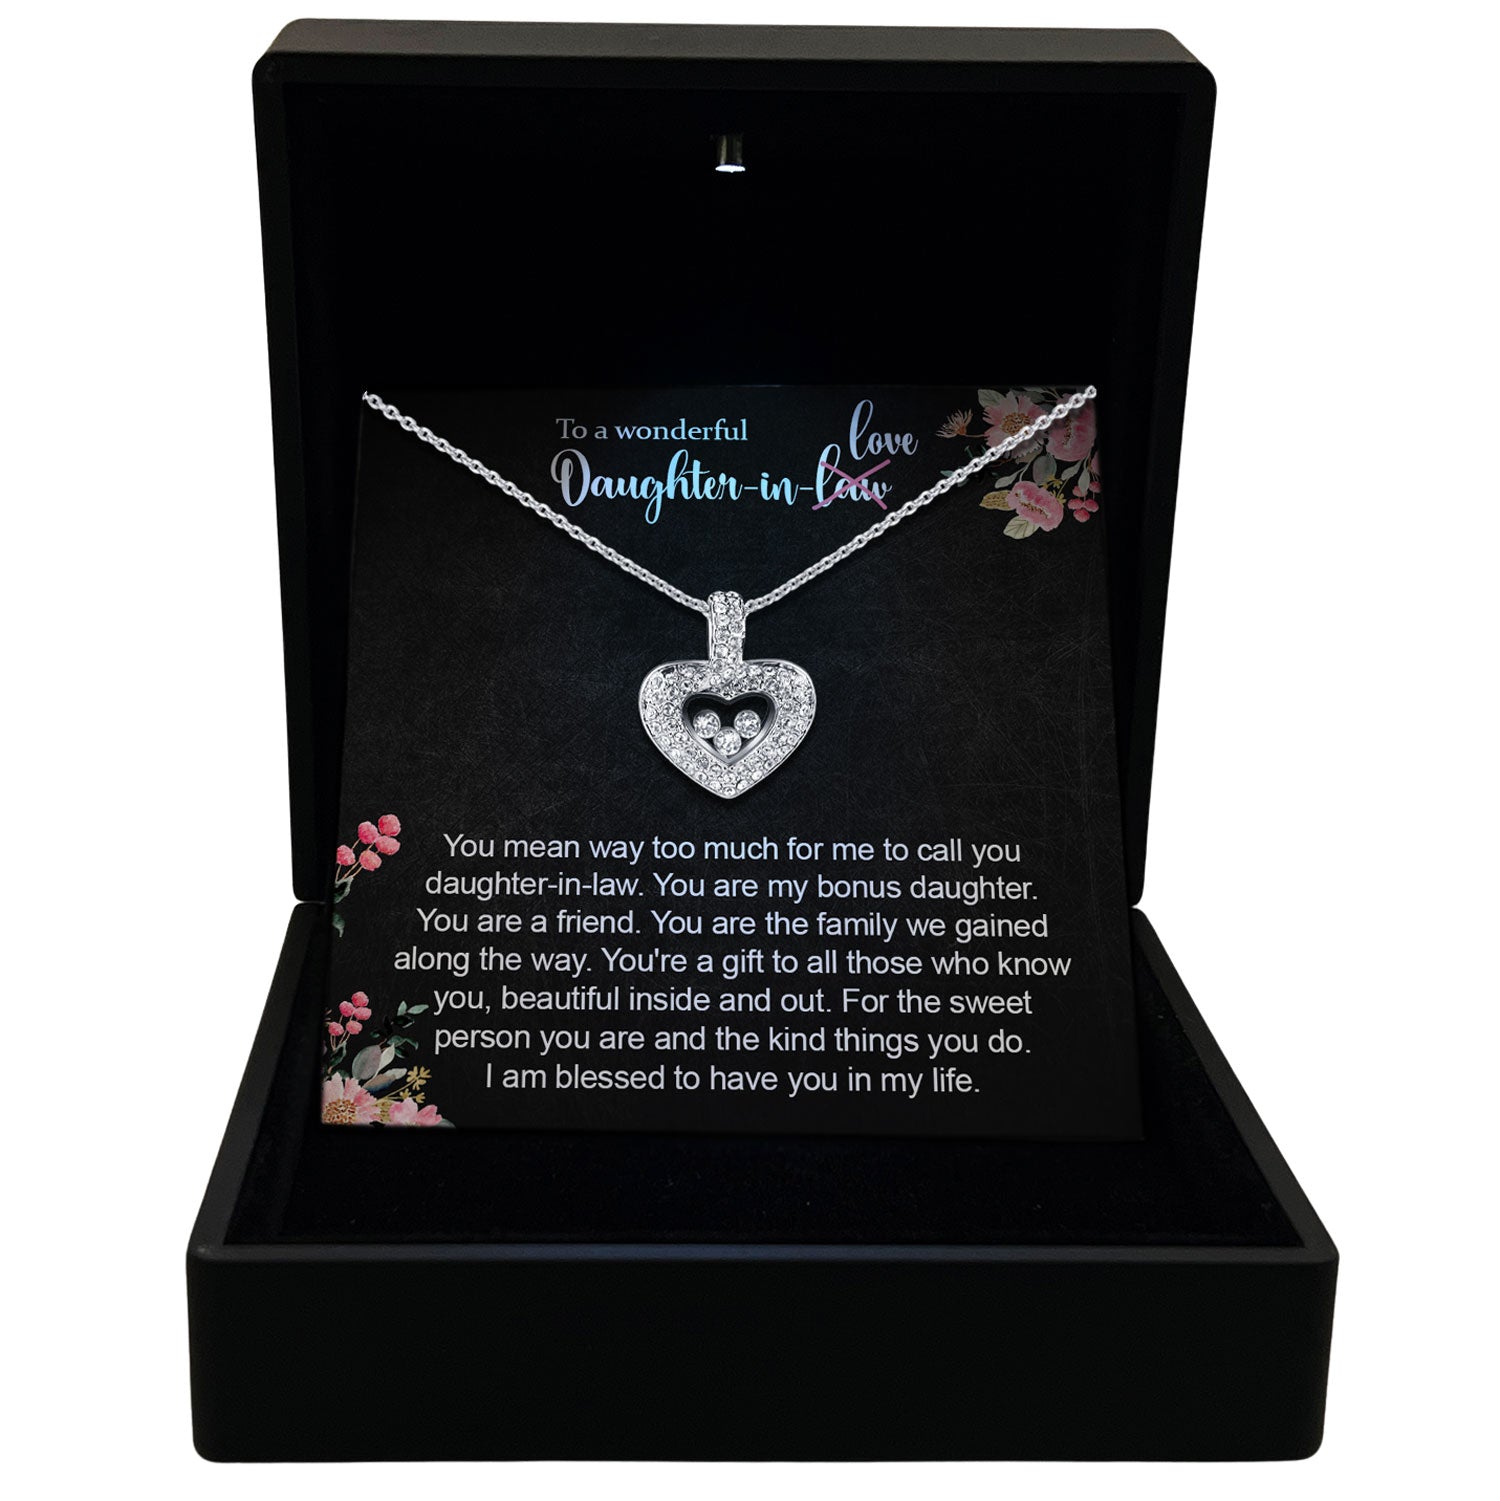 To My Wonderful Daughter-in-Law - You Are My Bonus Daughter - Tryndi Floating Heart Necklace